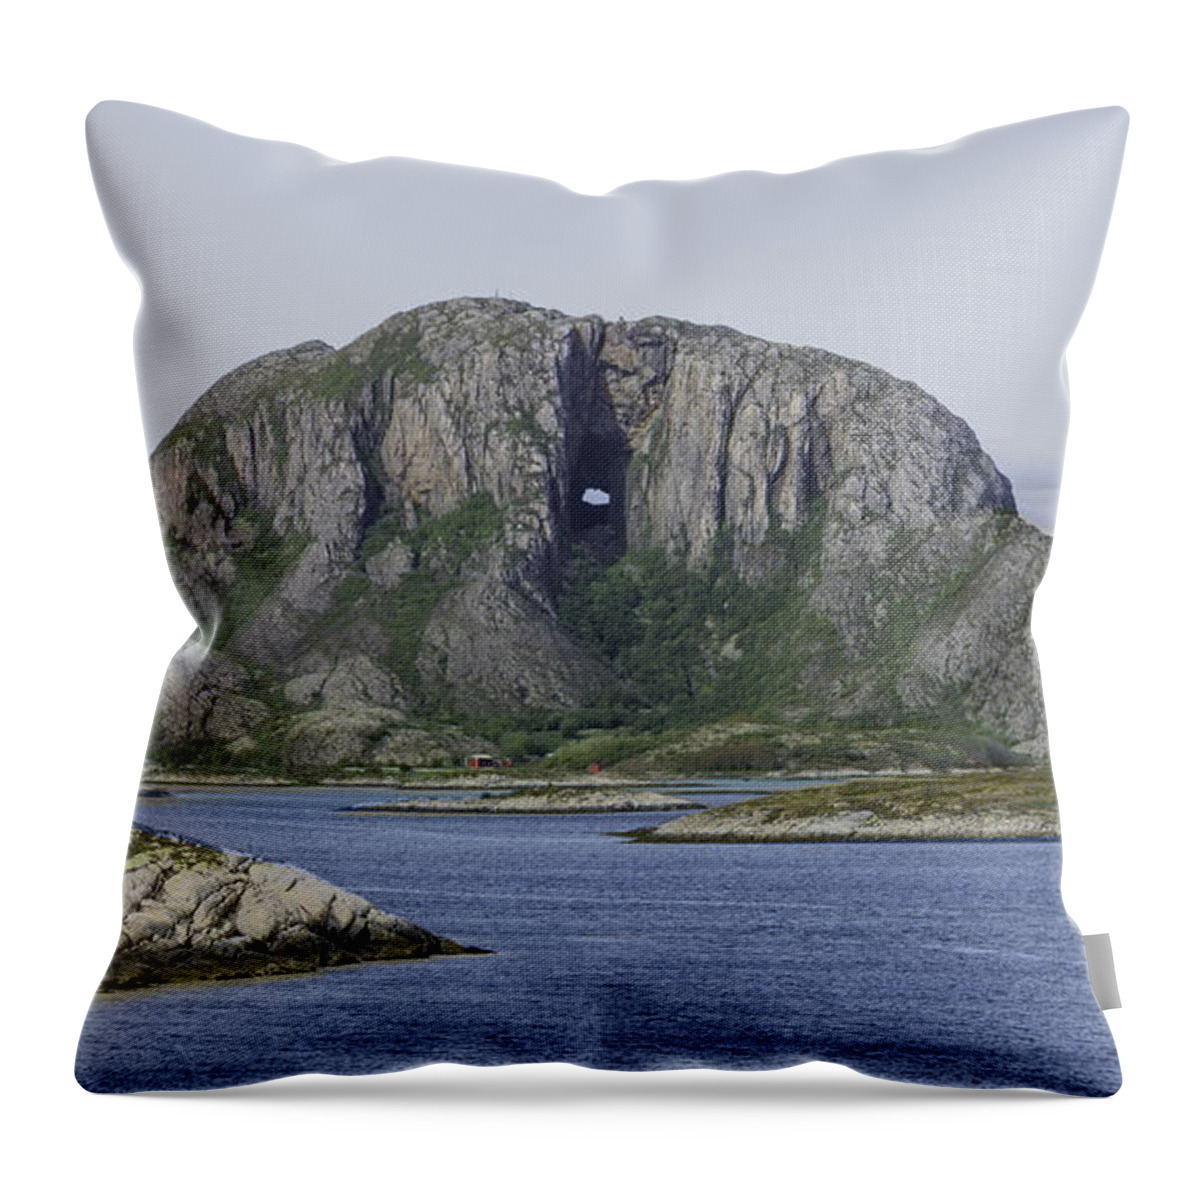 Norway Throw Pillow featuring the photograph Torghatten by Alan Toepfer